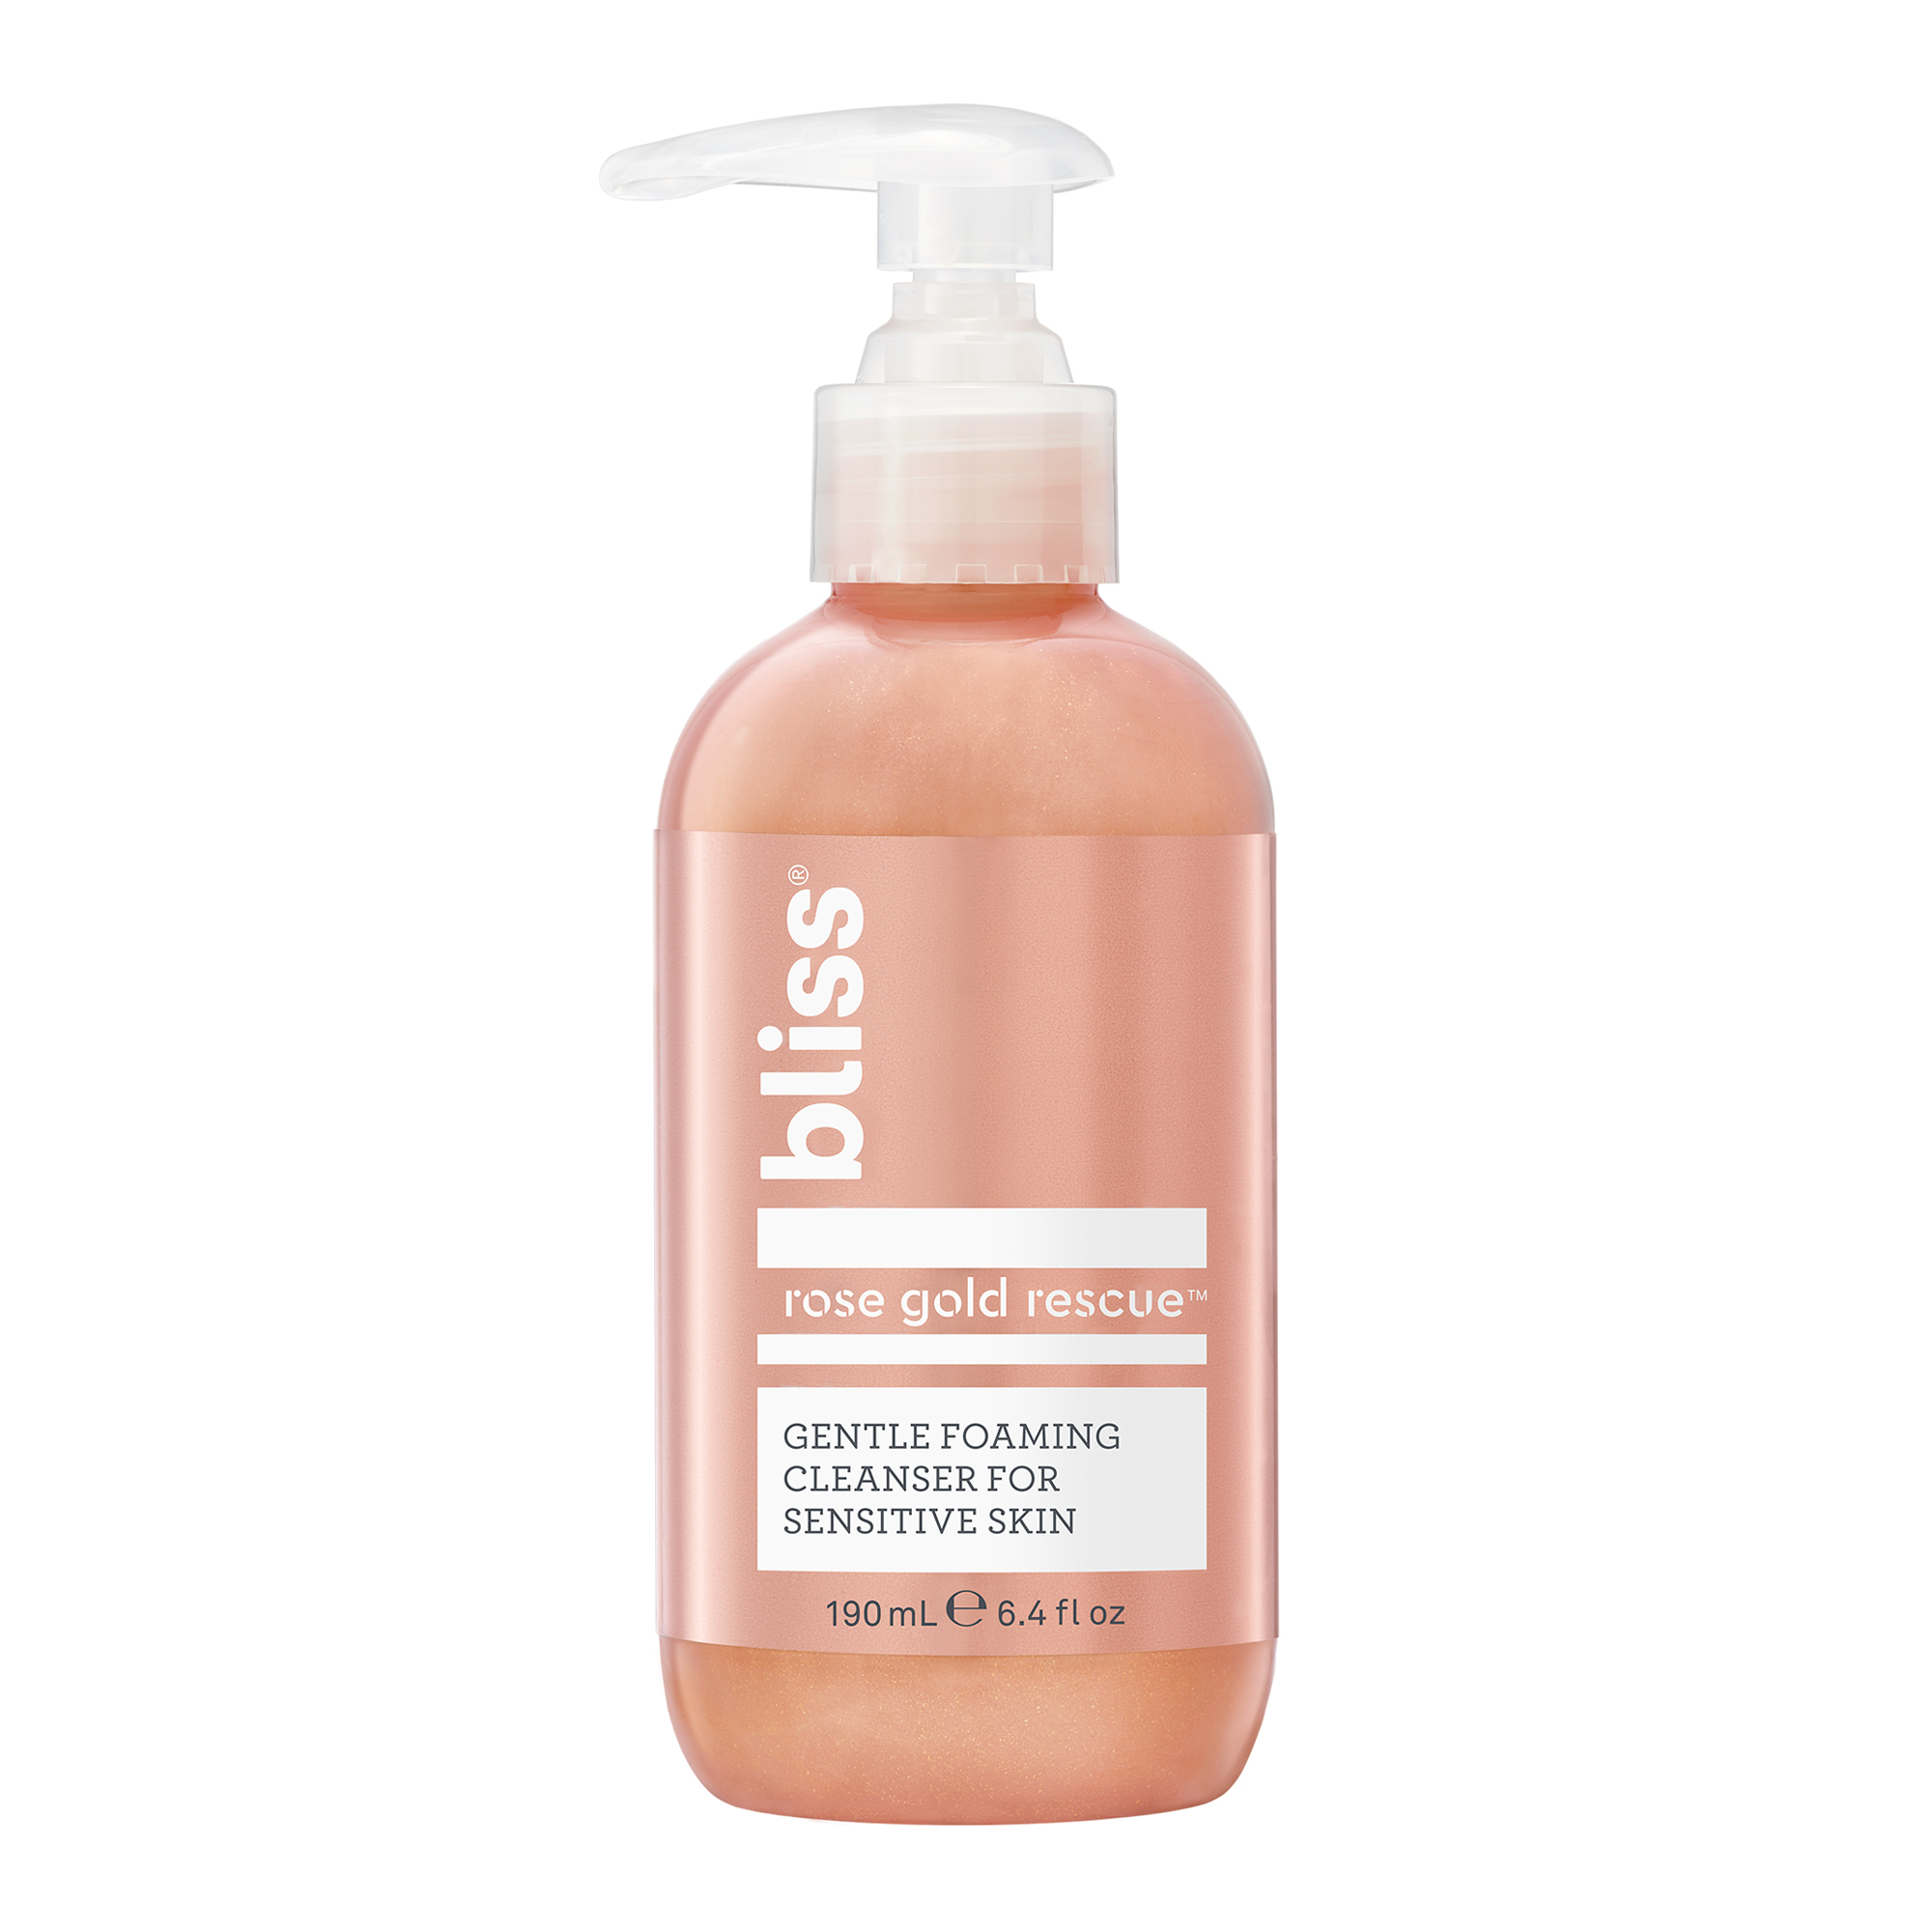 Bliss Rose Gold Rescue™ Foaming Facial Cleanser, Normal to Sensitive Skin, 6.4 fl oz - image 1 of 2